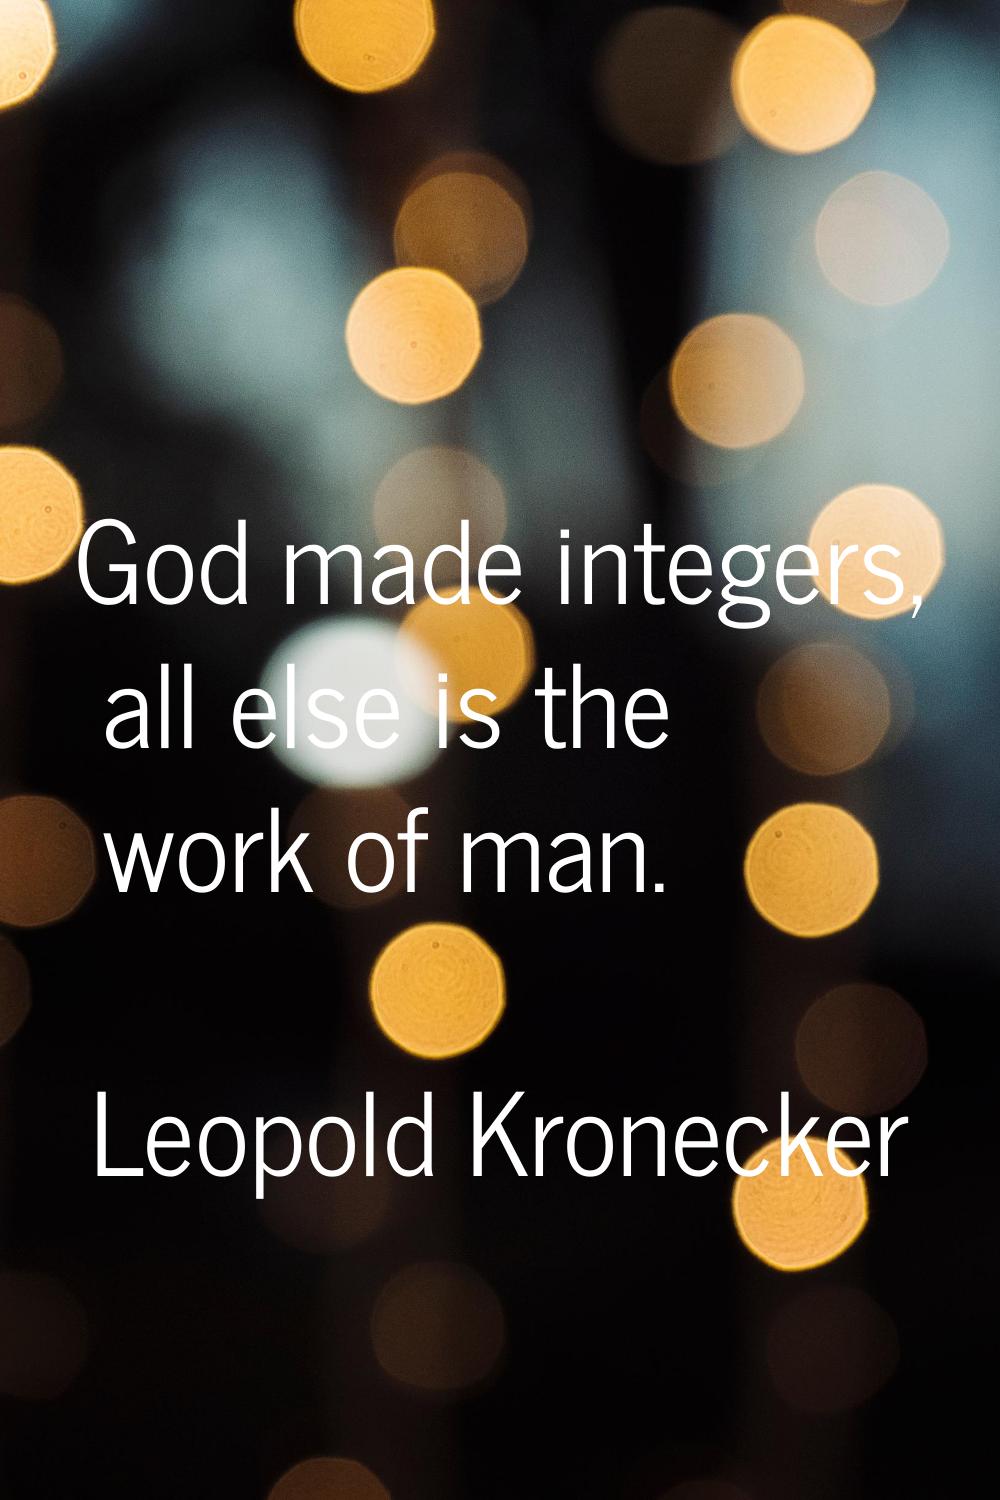 God made integers, all else is the work of man.